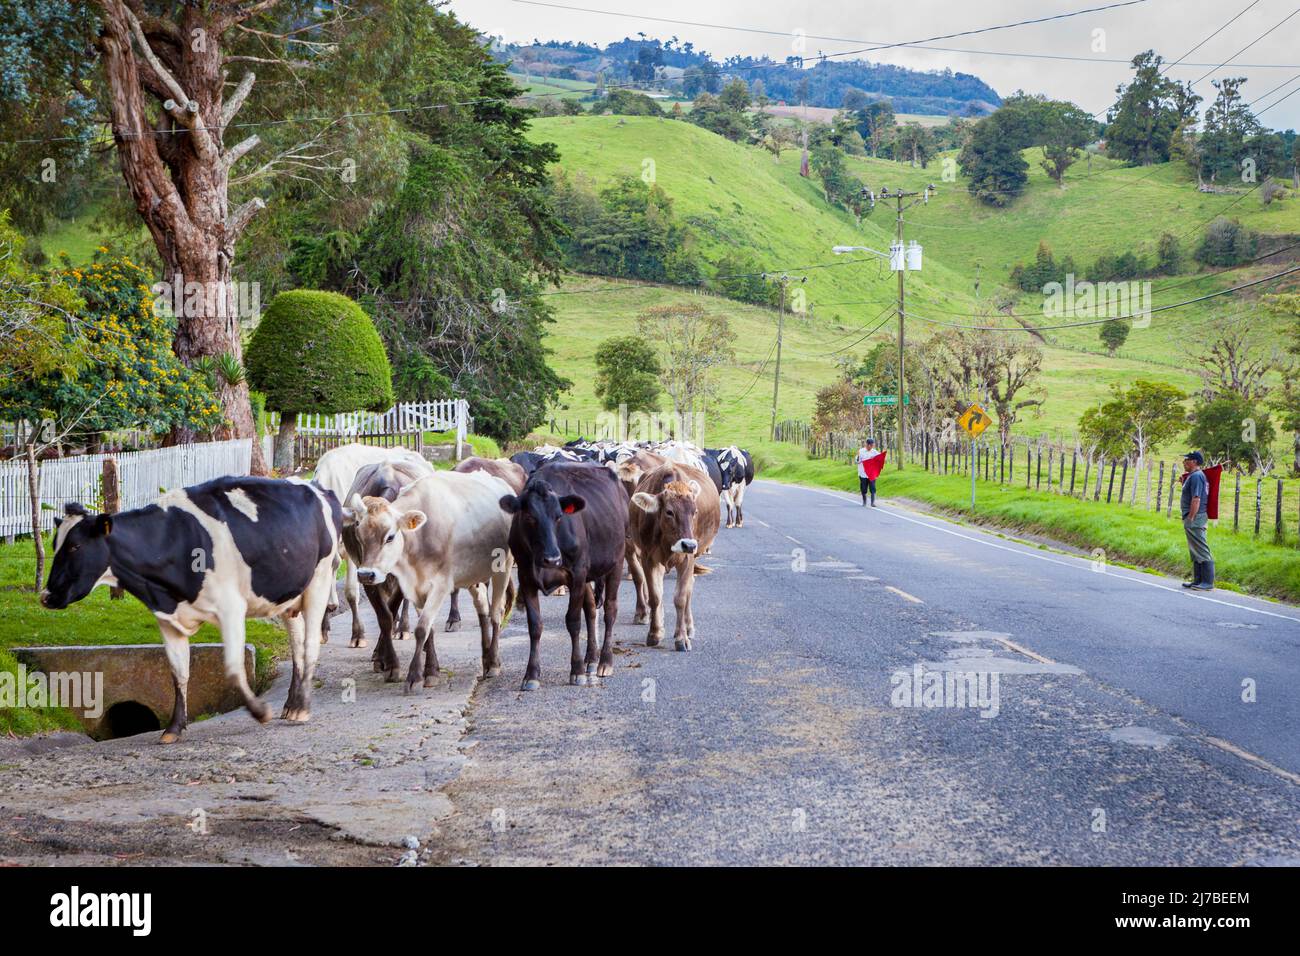 Livestock are being guided from the green fields back to the farm facilities in Cerro Punta, Chiriqui province, Republic of Panama, Central America. Stock Photo